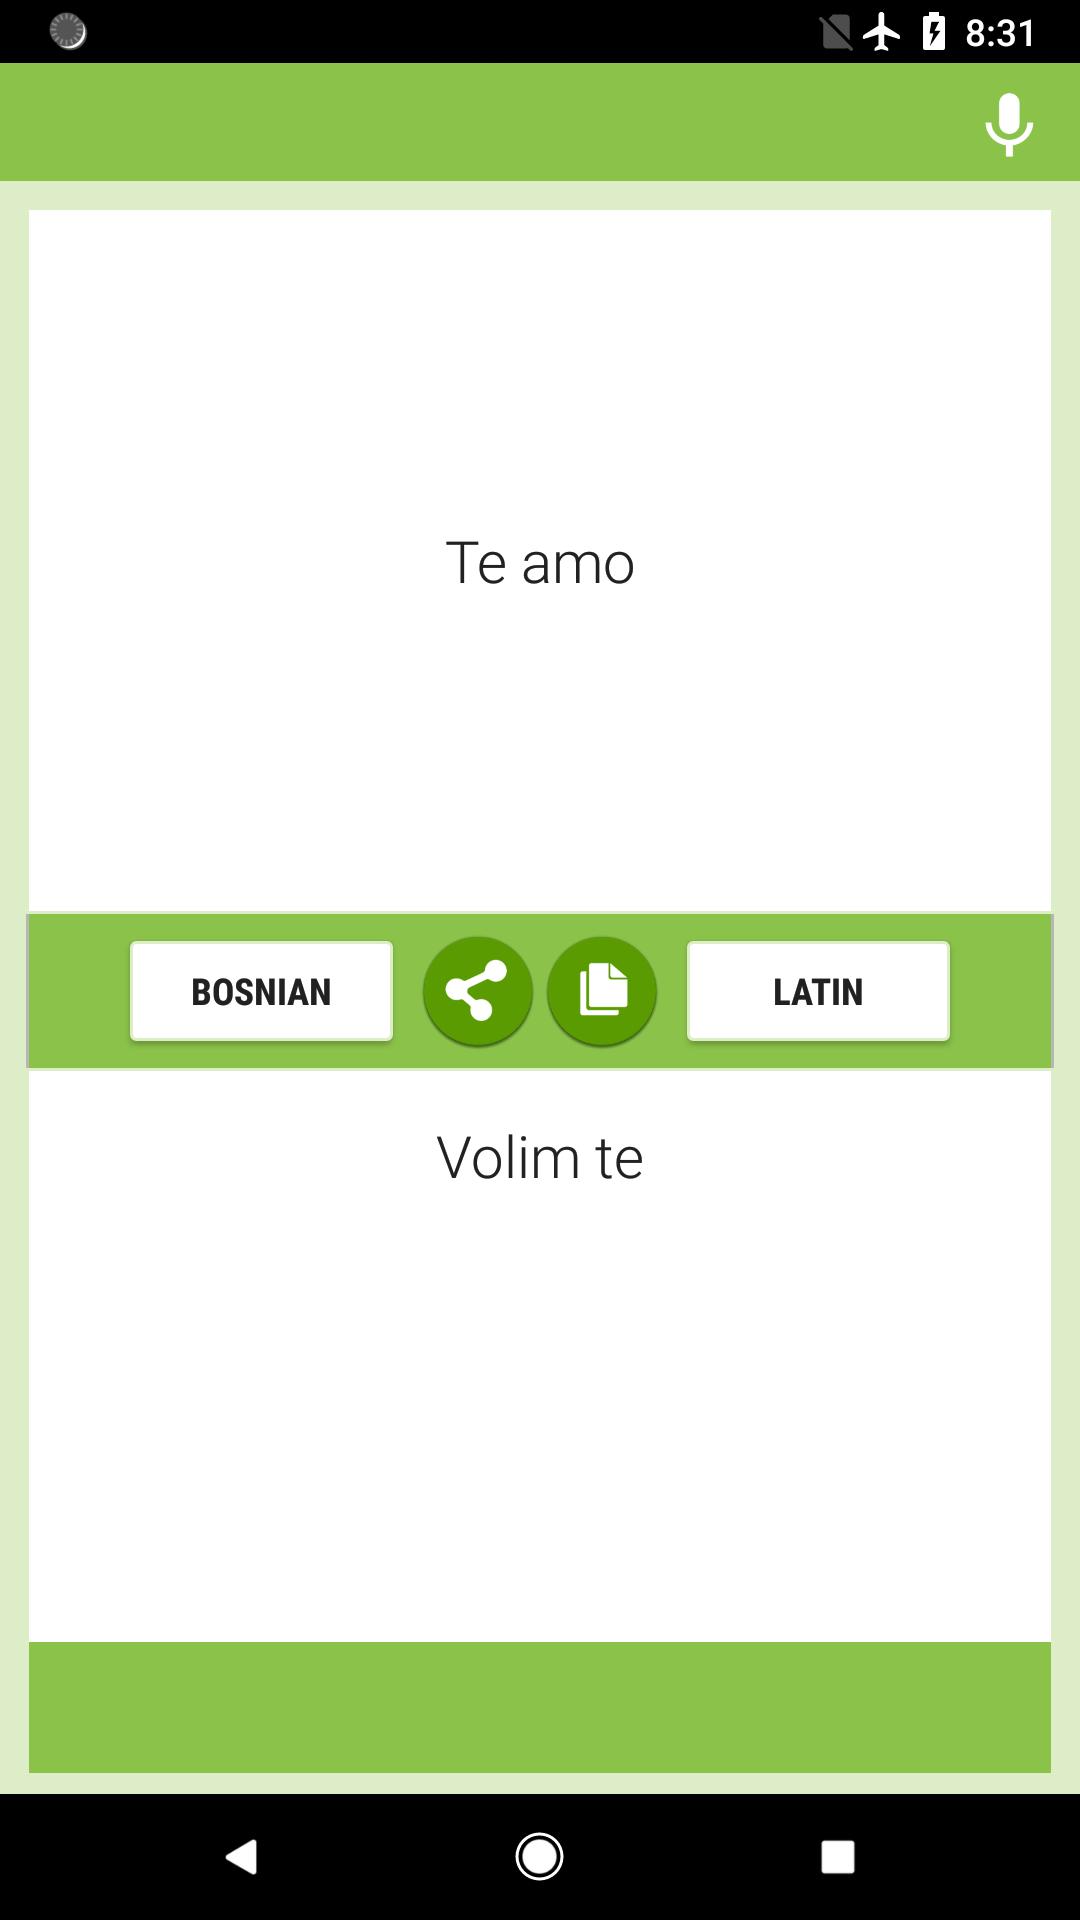 Bosniaca, Latine Latin Edition Apk Voor Android Download